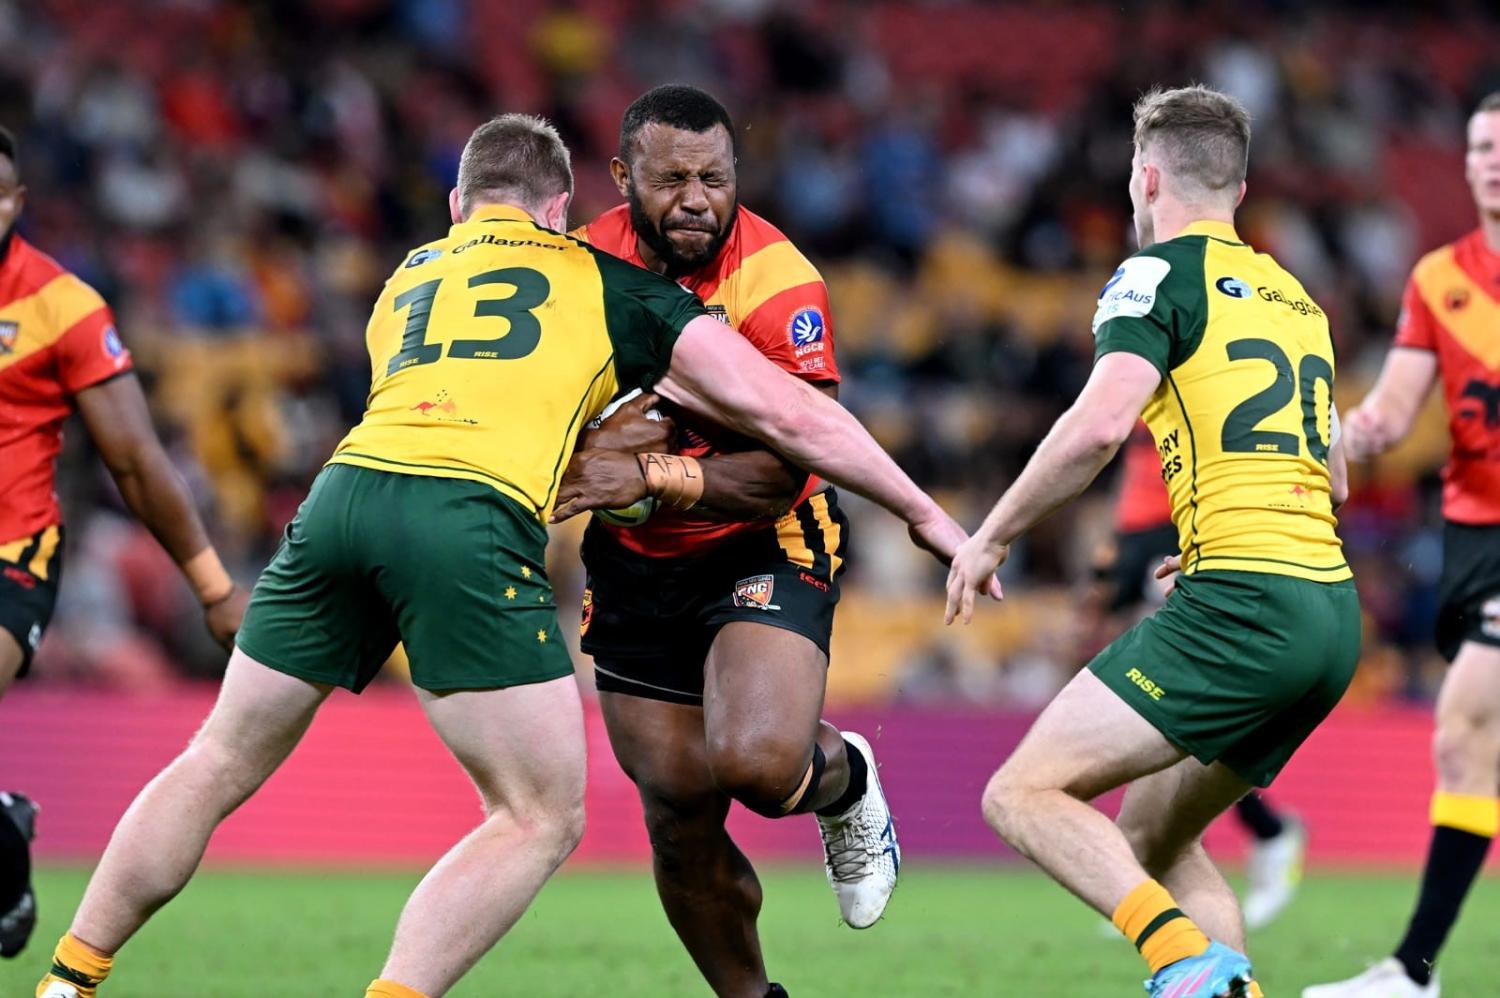 McKenzie Yei of Papua New Guinea takes on the defence during the international match between Australian Men's PMs XIII and PNG Men's PMs XIII at Suncorp Stadium, Brisbane, 25 September 2022 (Bradley Kanaris/Getty Images)